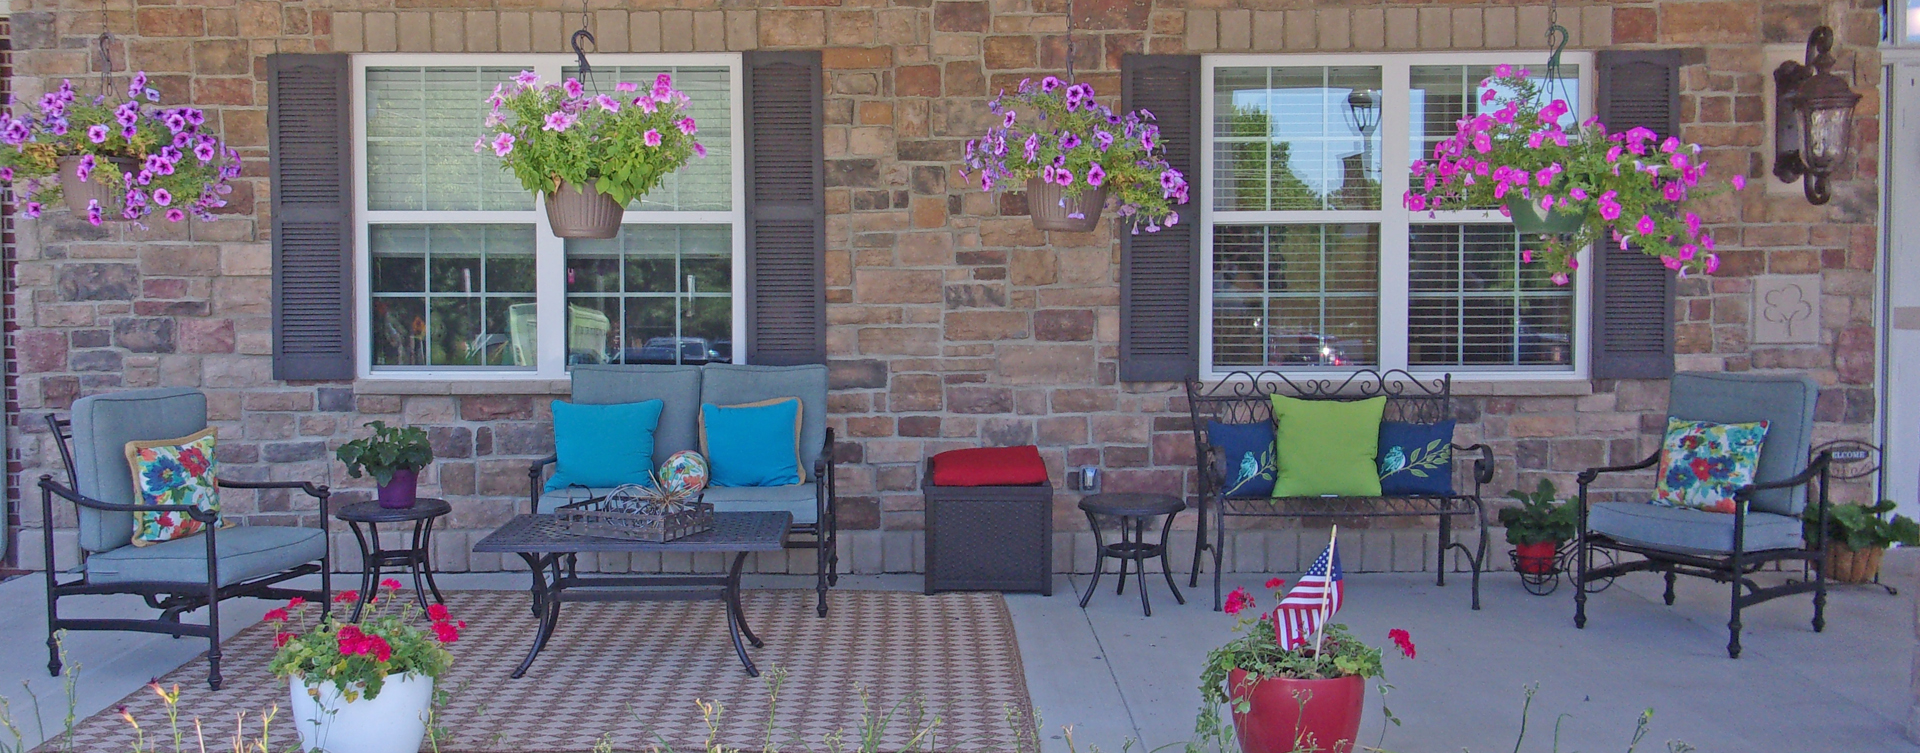 Enjoy conversations with friends on the porch at Bickford of Chesterfield